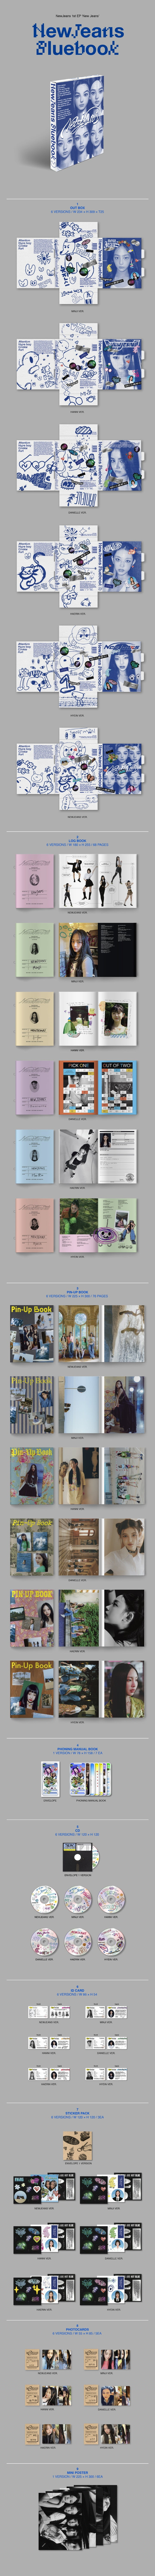 1 CD
1 LOG Book (68 pages)
1 Pin-up Book (76 pages)
7 Phoning Manual Books
6 ID Cards
1 Sticker Pack
5 Photo Cards
1 Mini ...